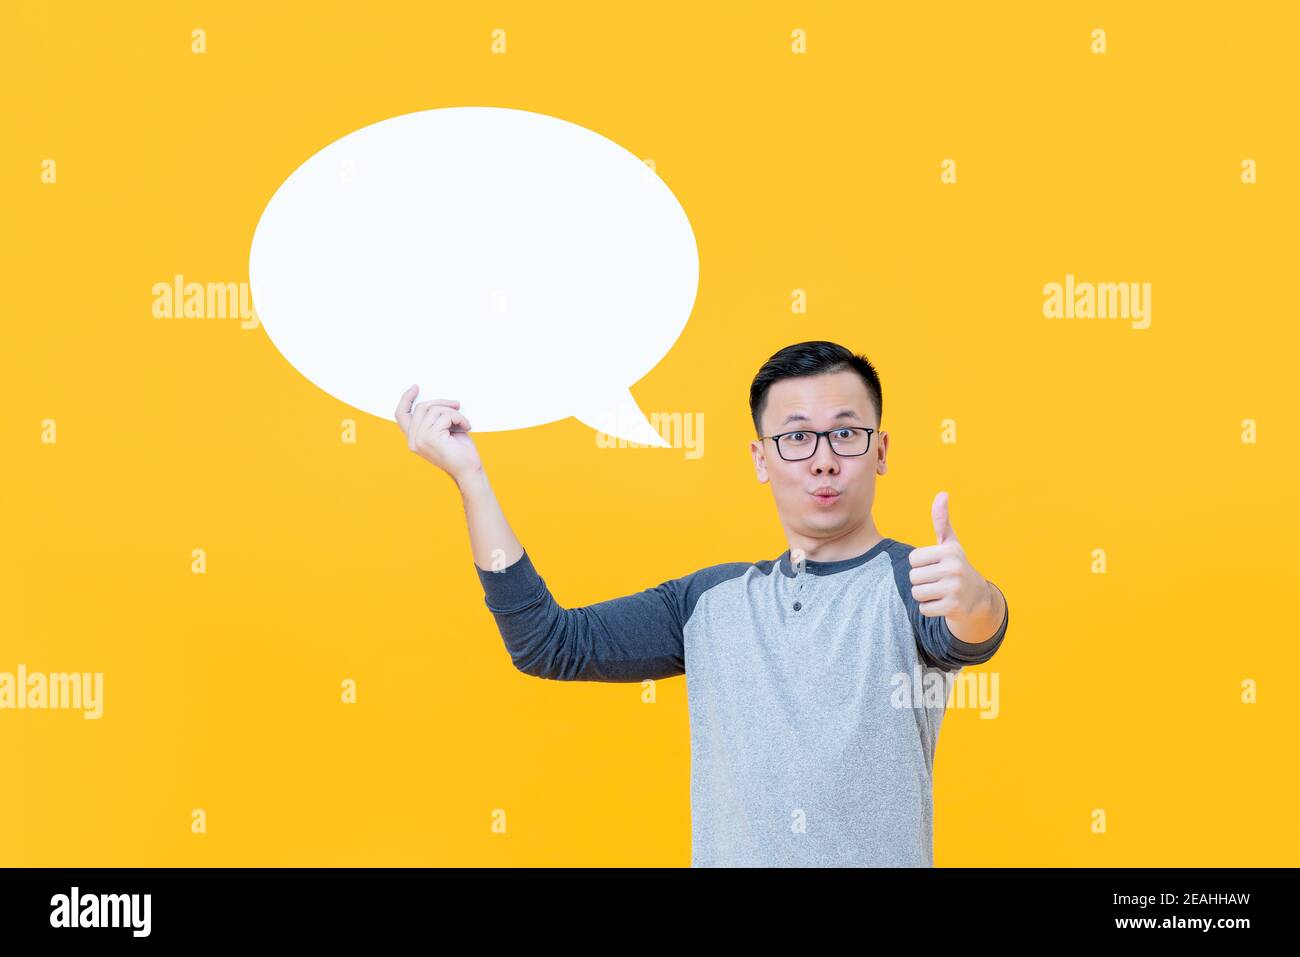 Excited shocked young Asian man giving thumbs up while holding blank speech bubble Stock Photo